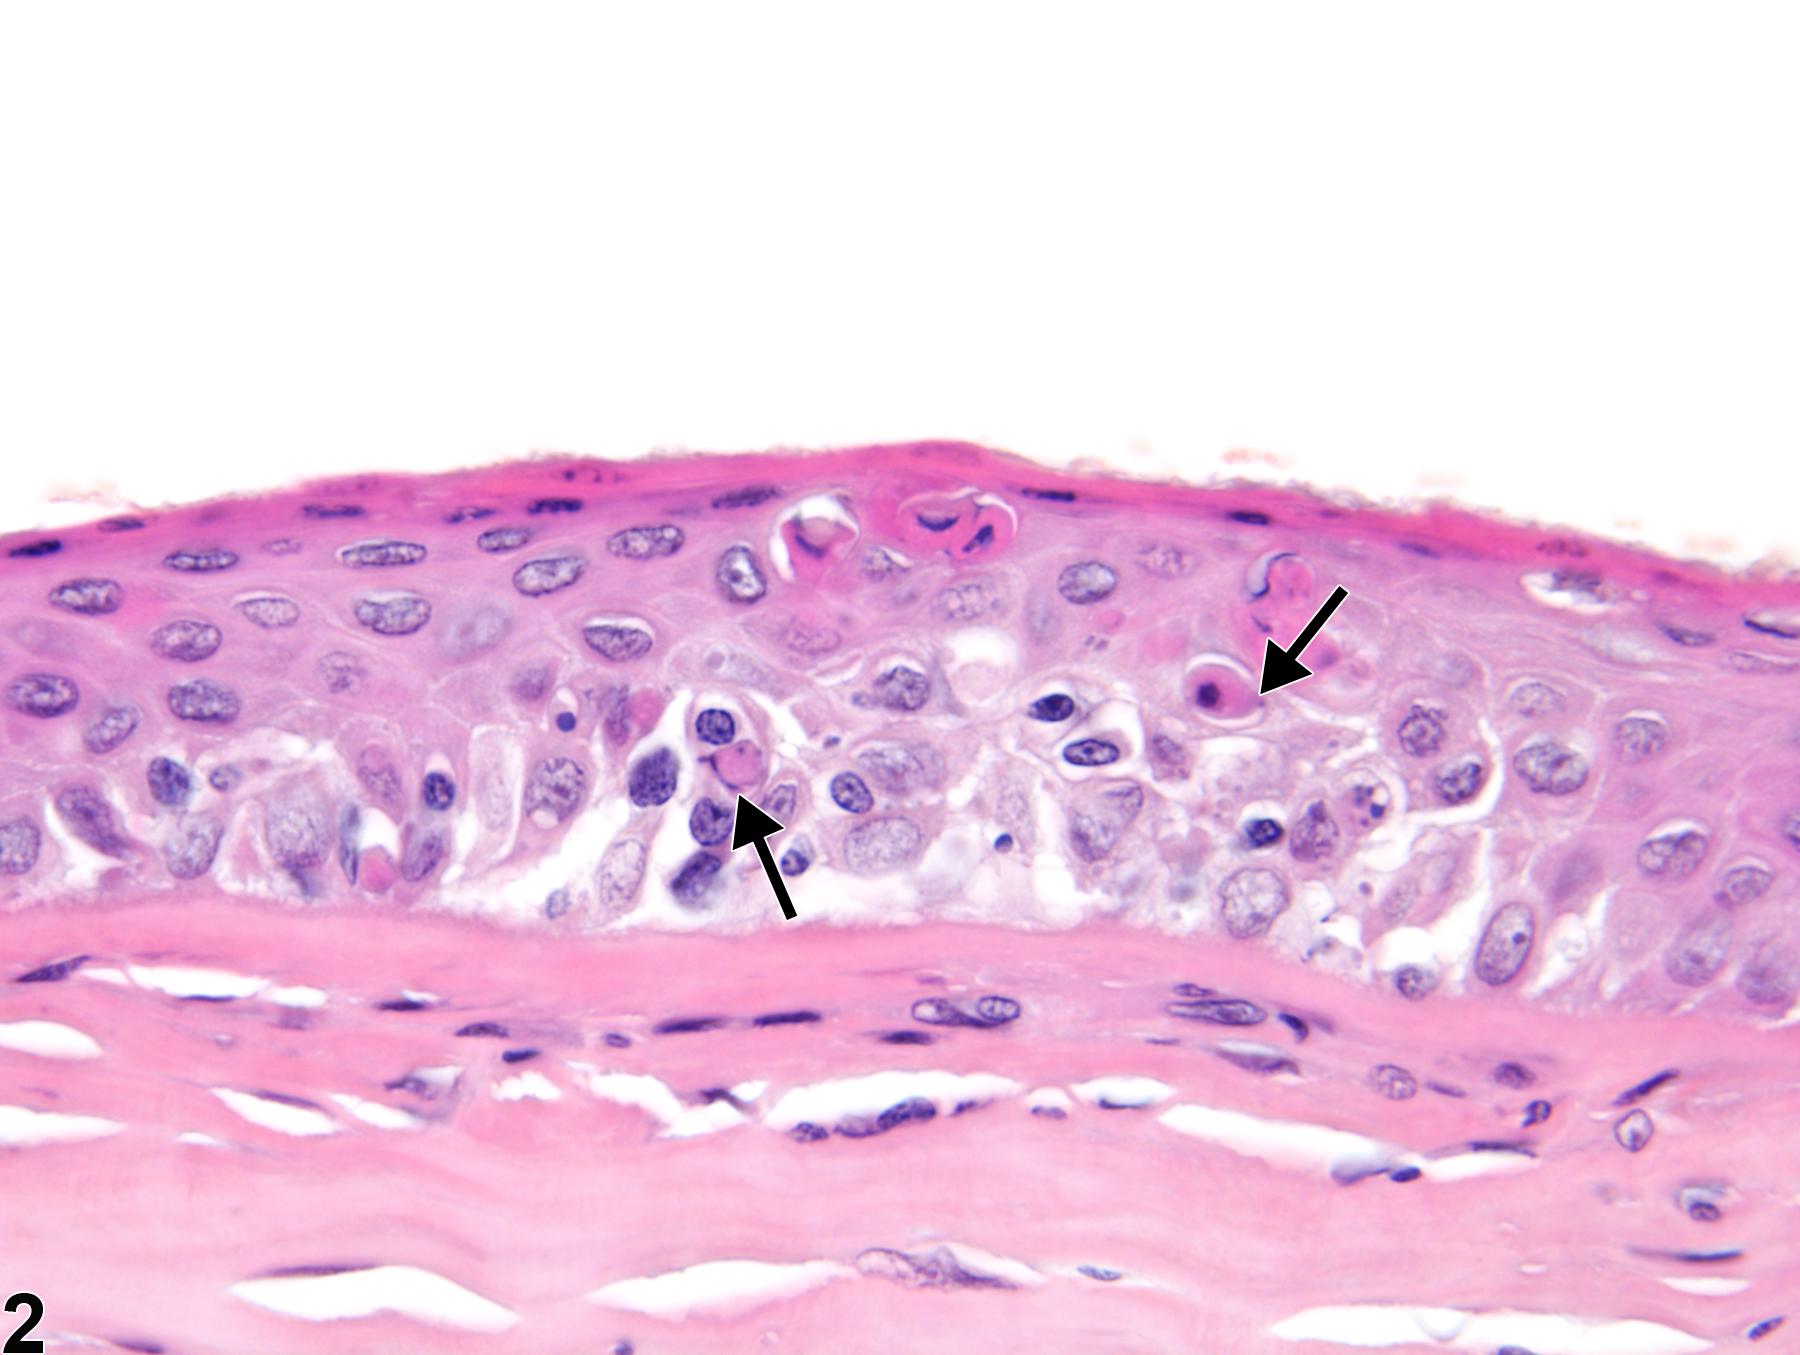 Image of cornea necrosis in the eye from a female F344/N rat in a chronic study